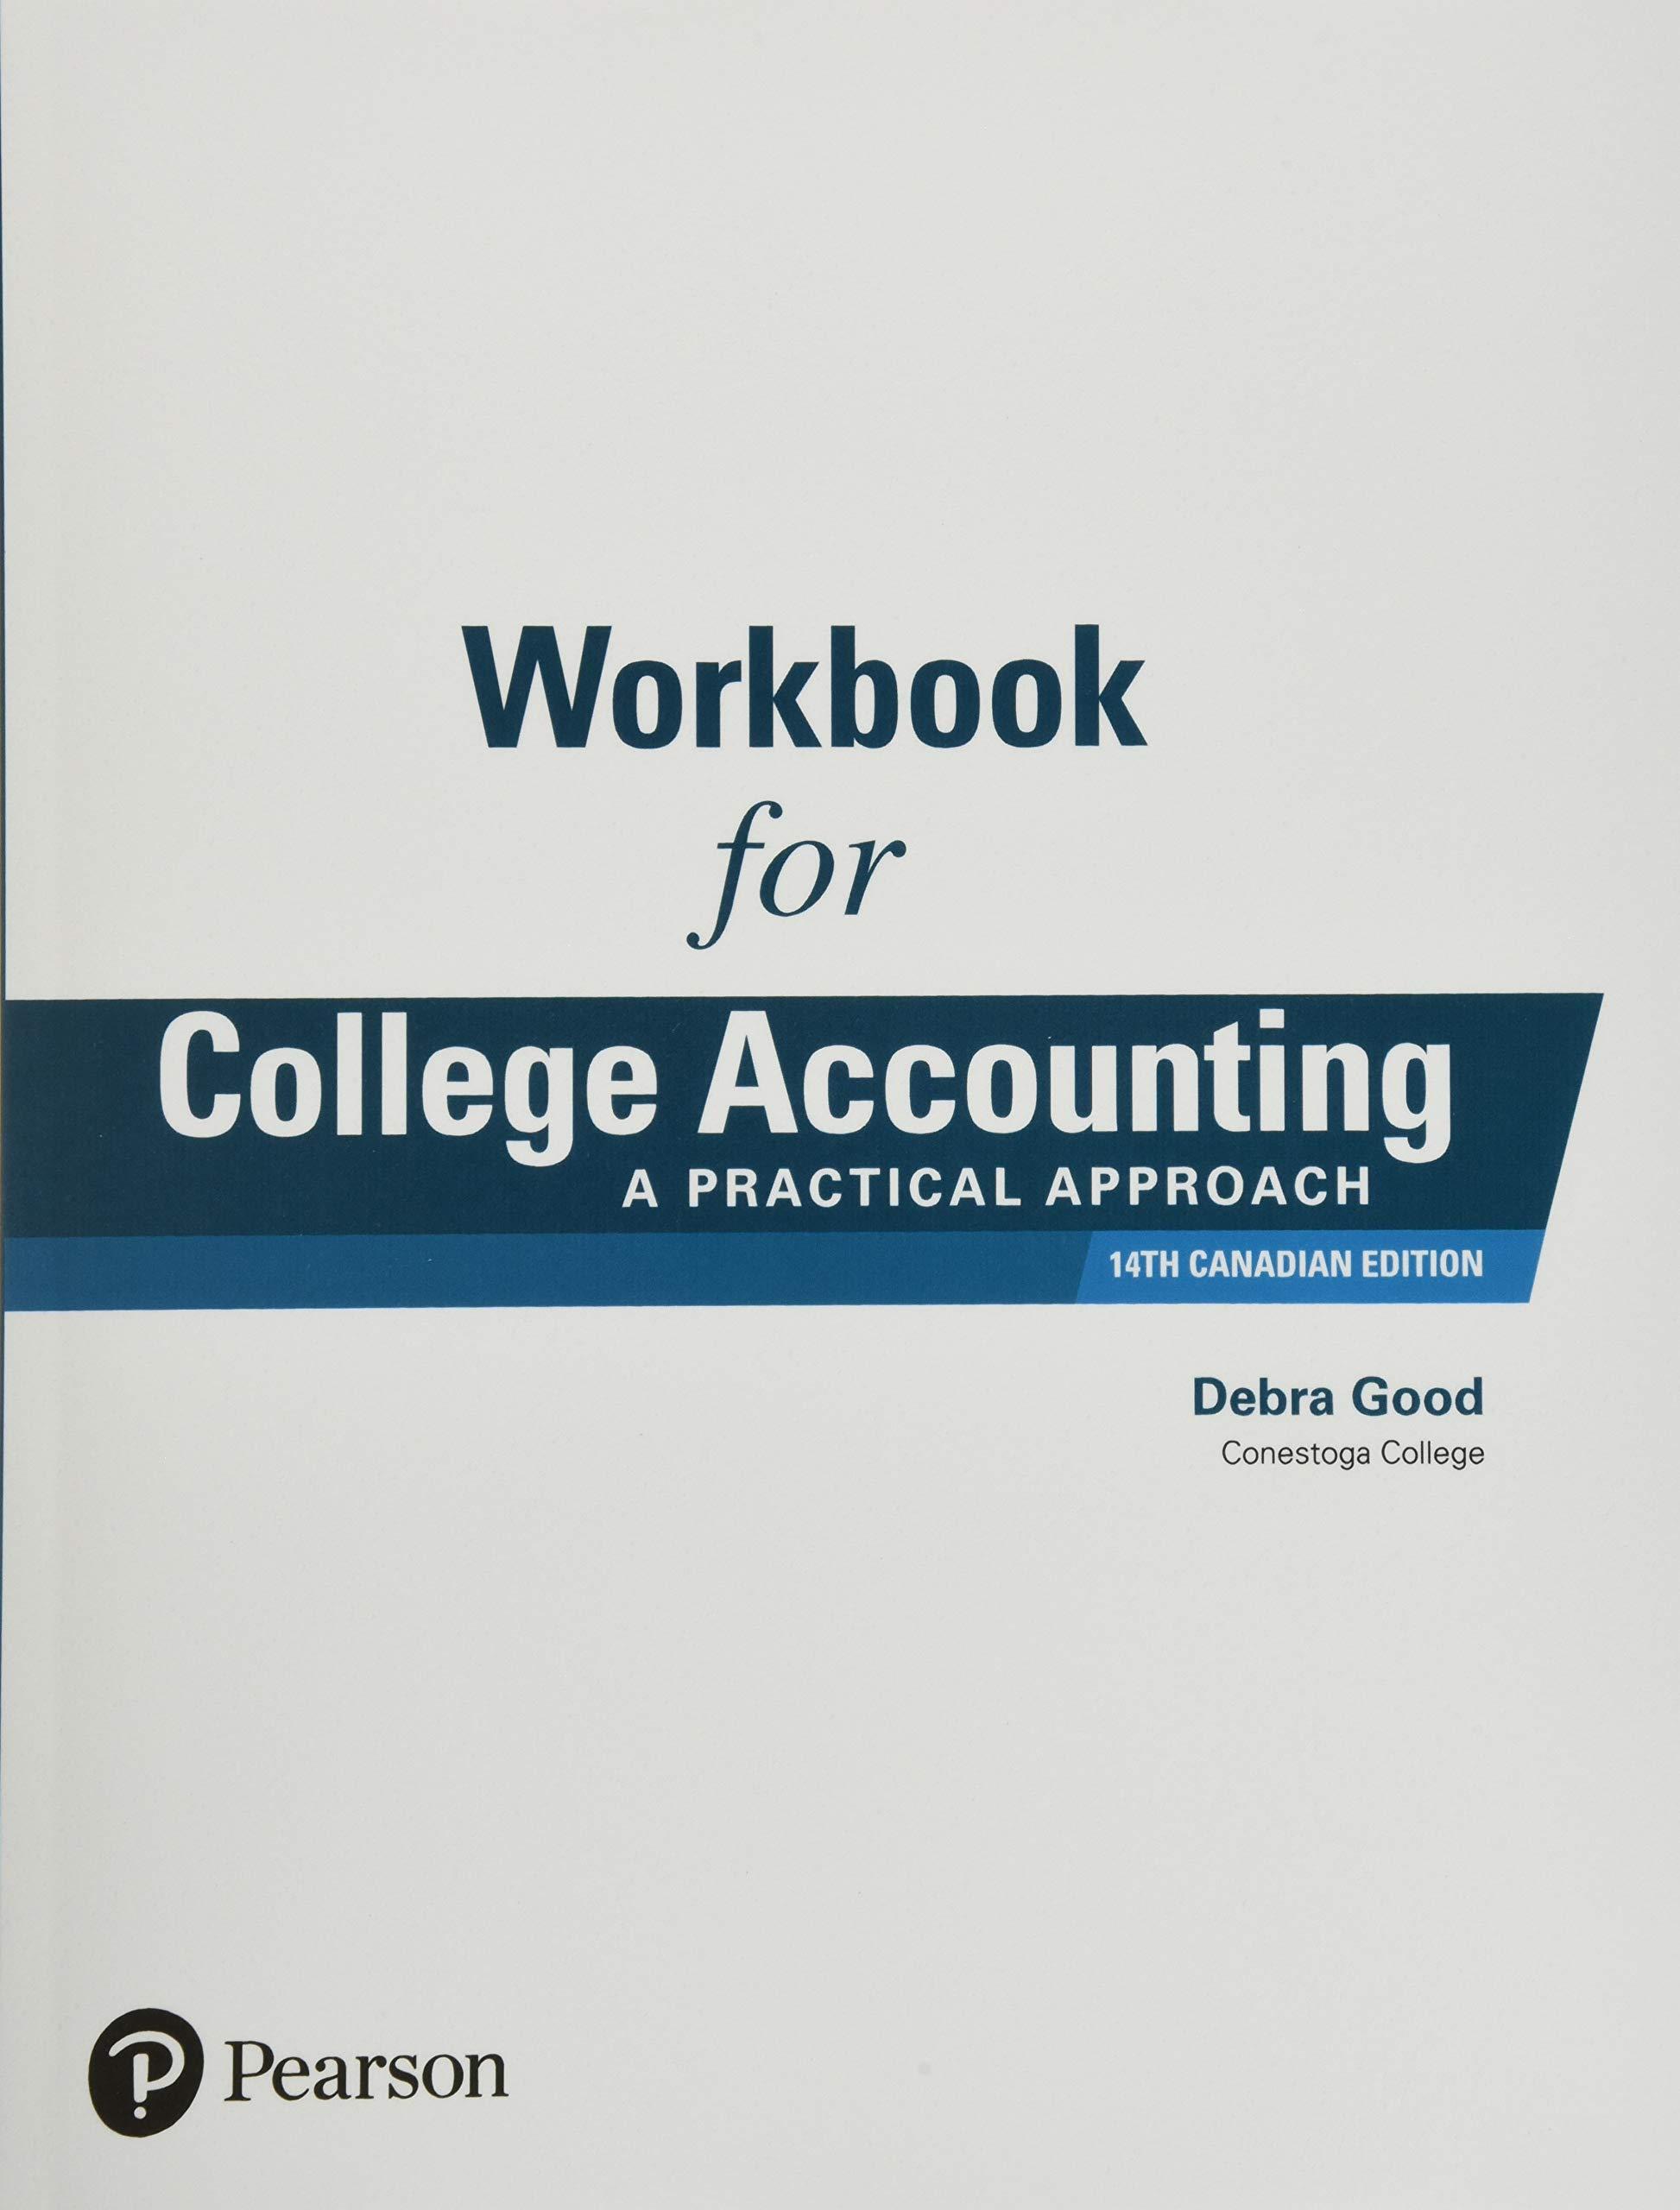 workbook for college accounting a practical approach 14th canadian edition jeffrey slater, brian zwicker,